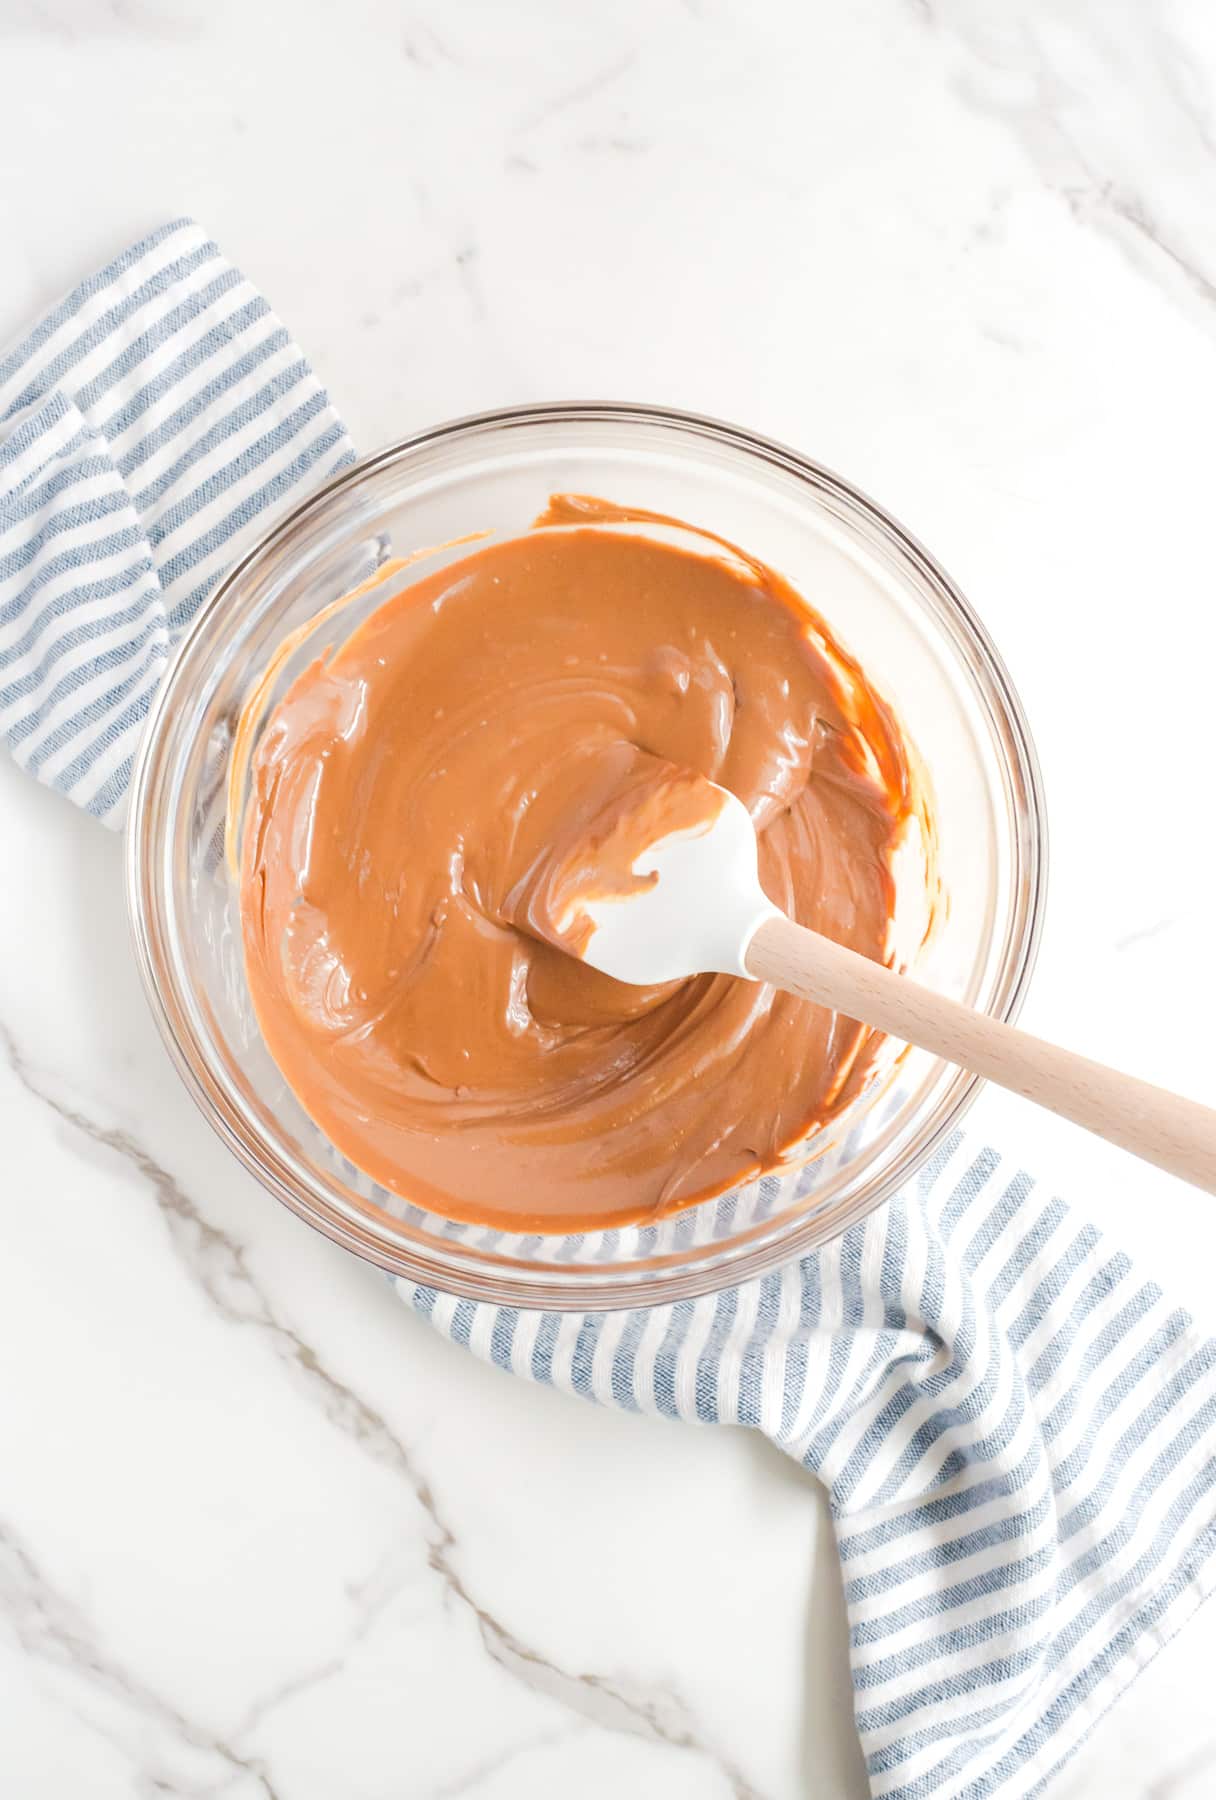 Chocolate and peanut butter melted in a bowl with a spatula stirring.